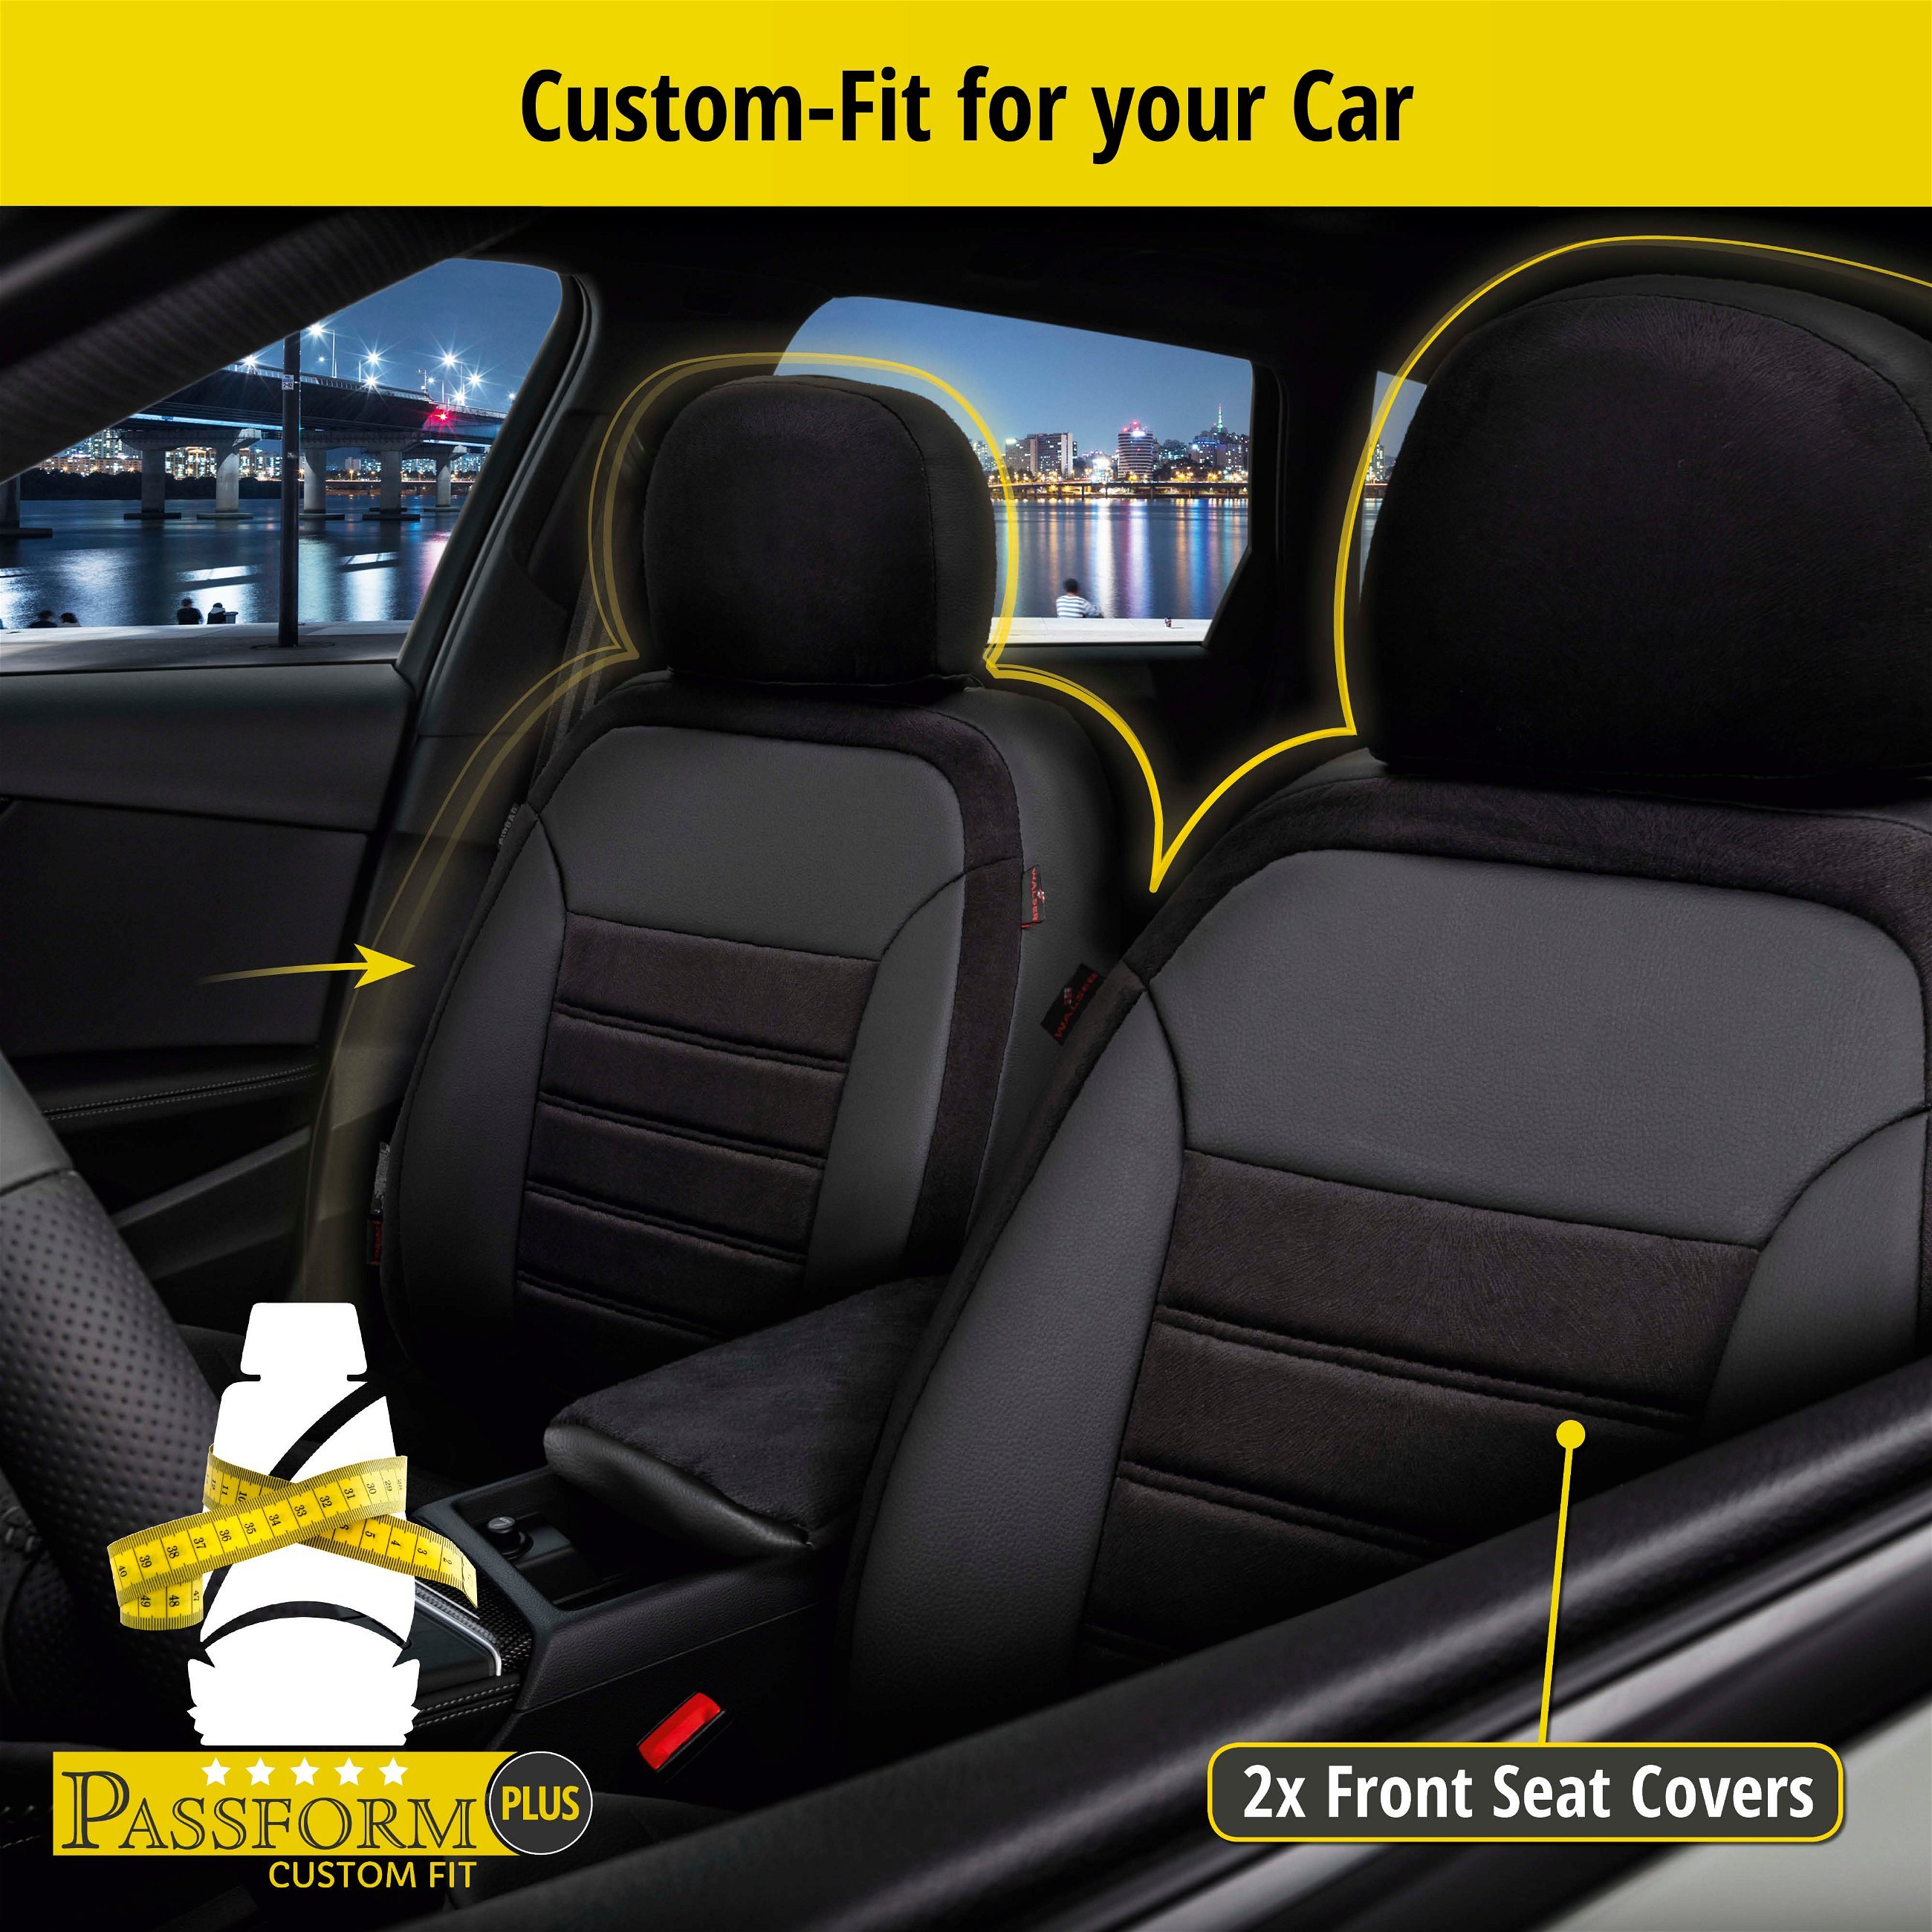 Seat Cover Bari for Suzuki Swift IV (FZ, NZ) 10/2010-Today, 2 seat covers for normal seats